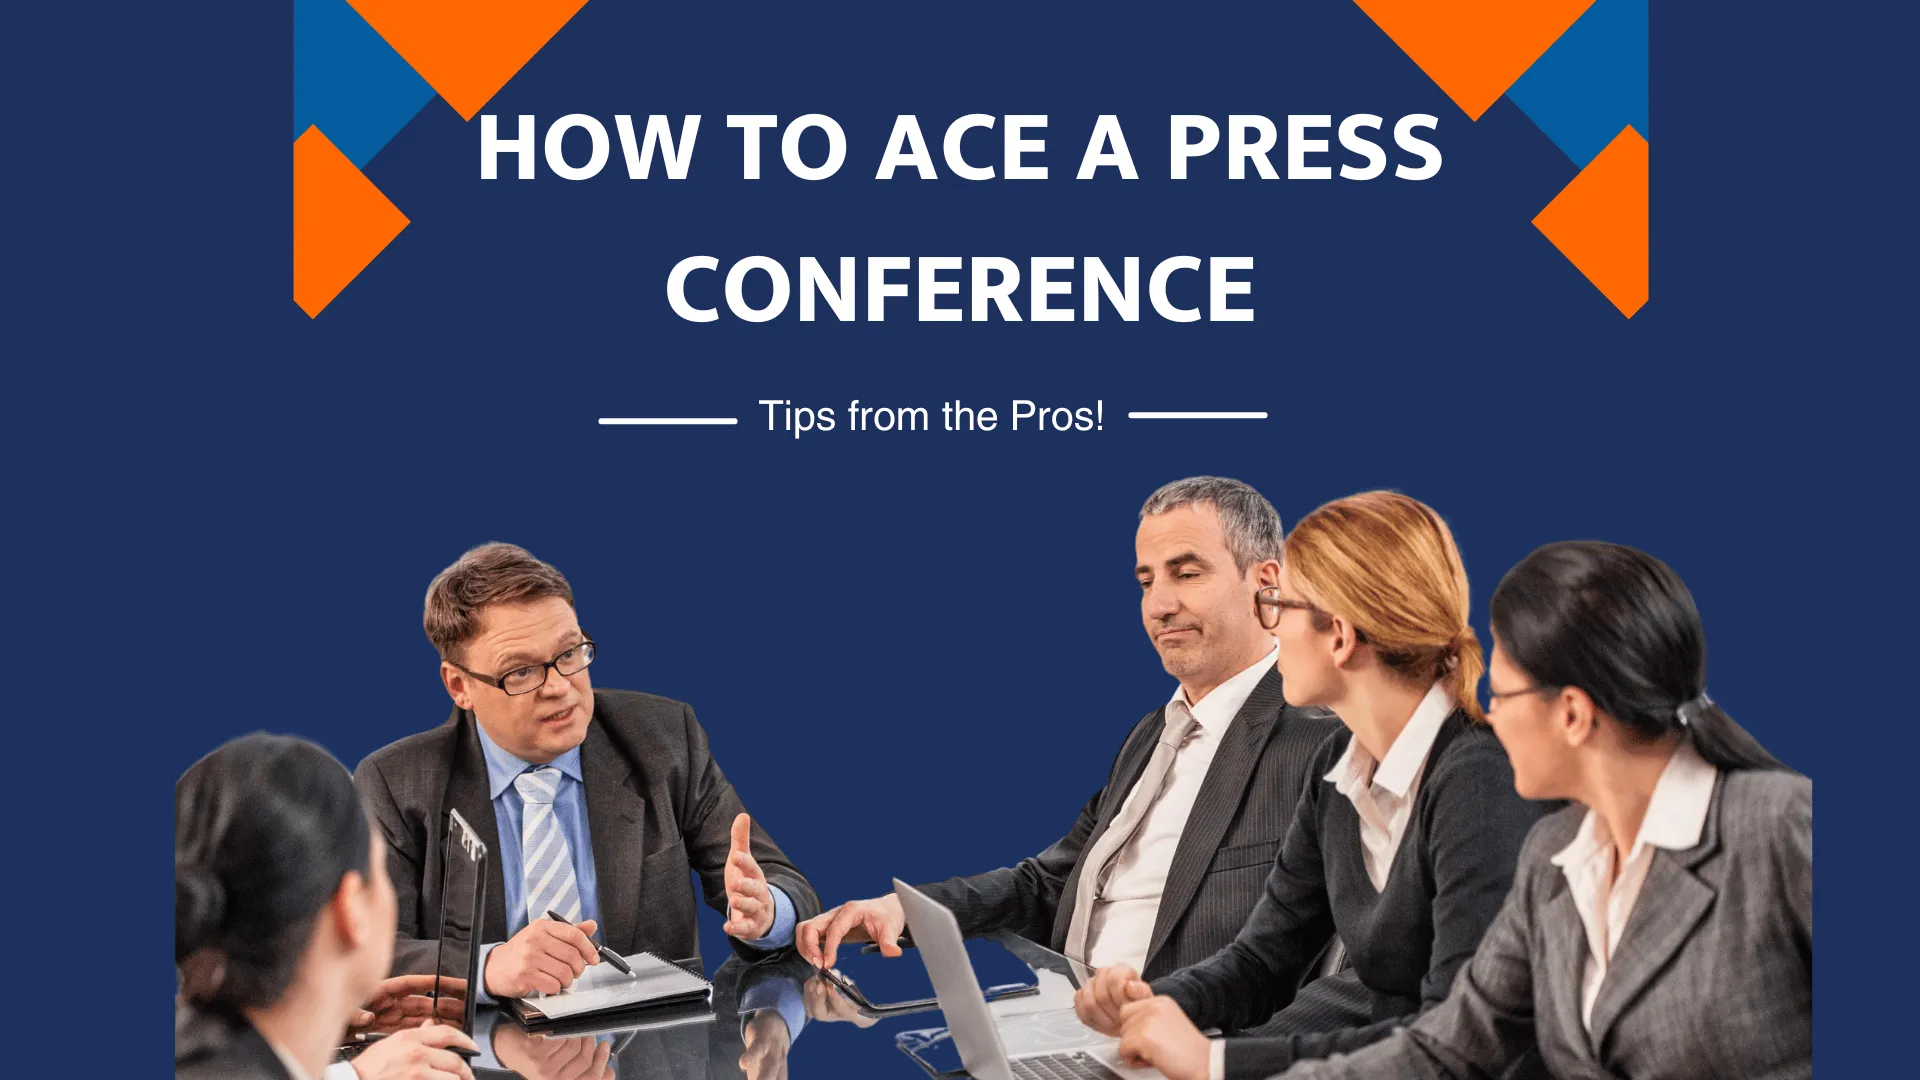 How to Ace a Press Conference: Tips from the Pros